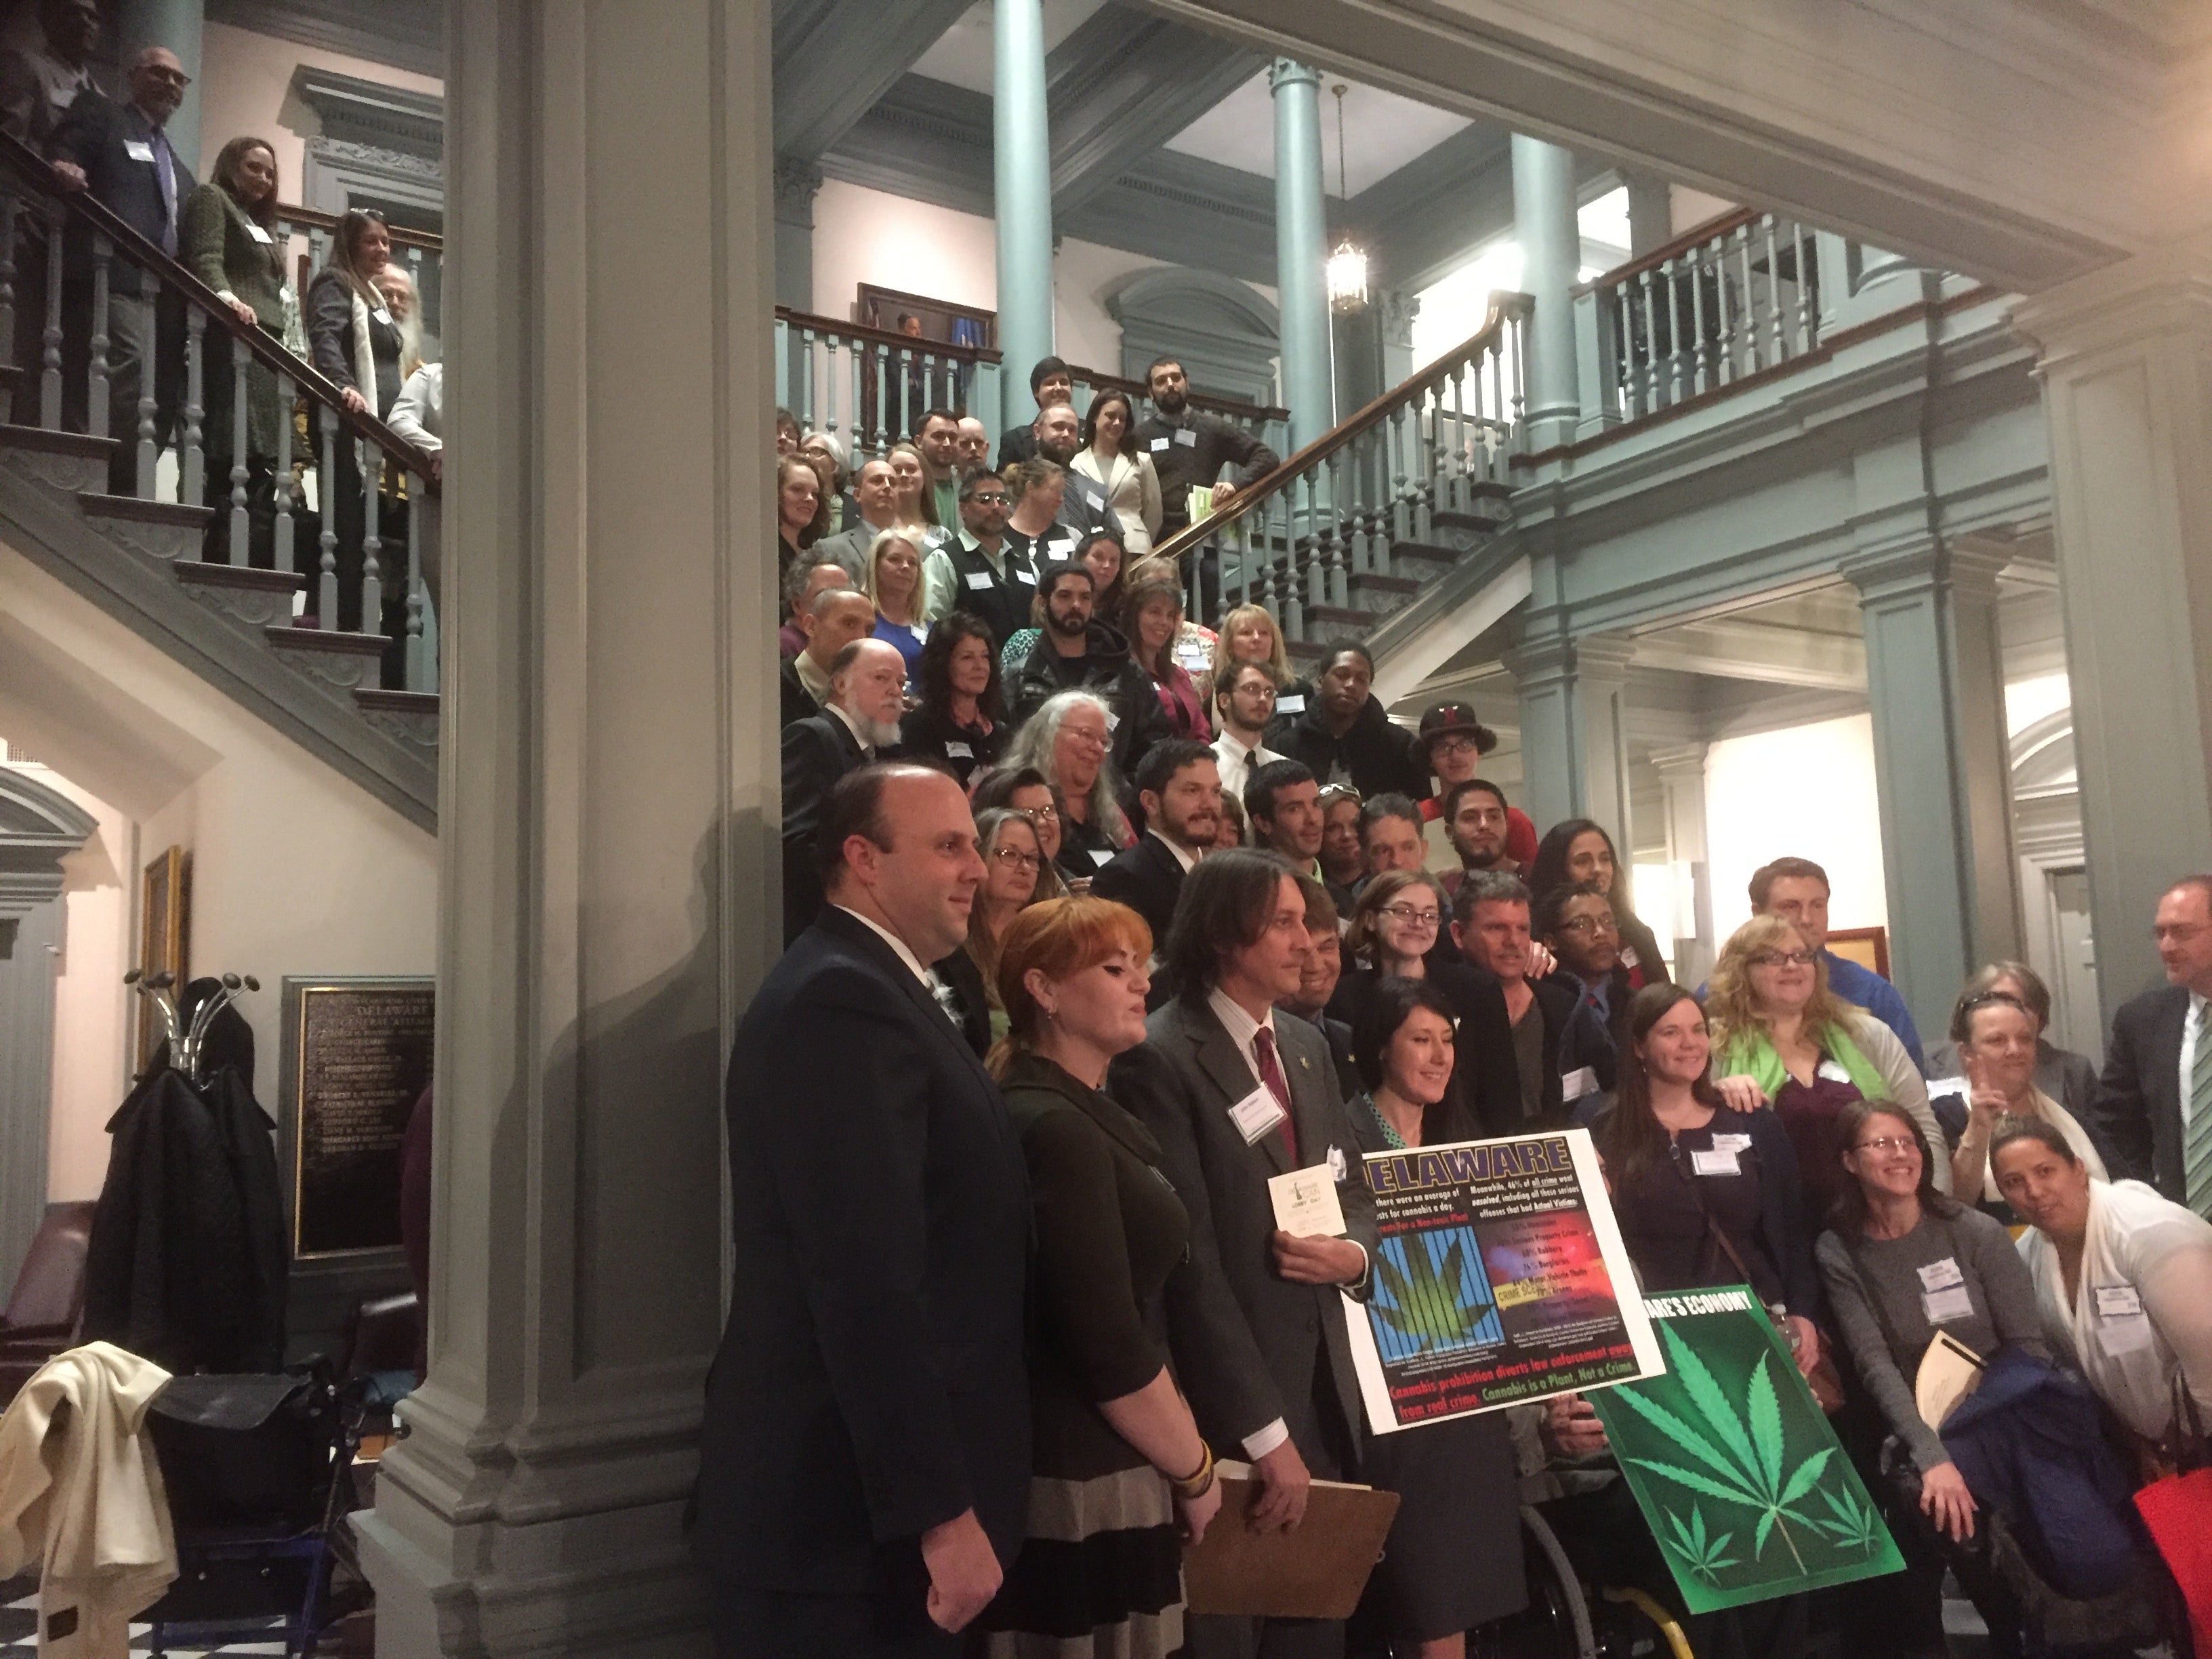 Advocates and Delaware residents posed for a photo before meeting legislators to discuss cannabis legislation. (Newsworks/Zoe Read)